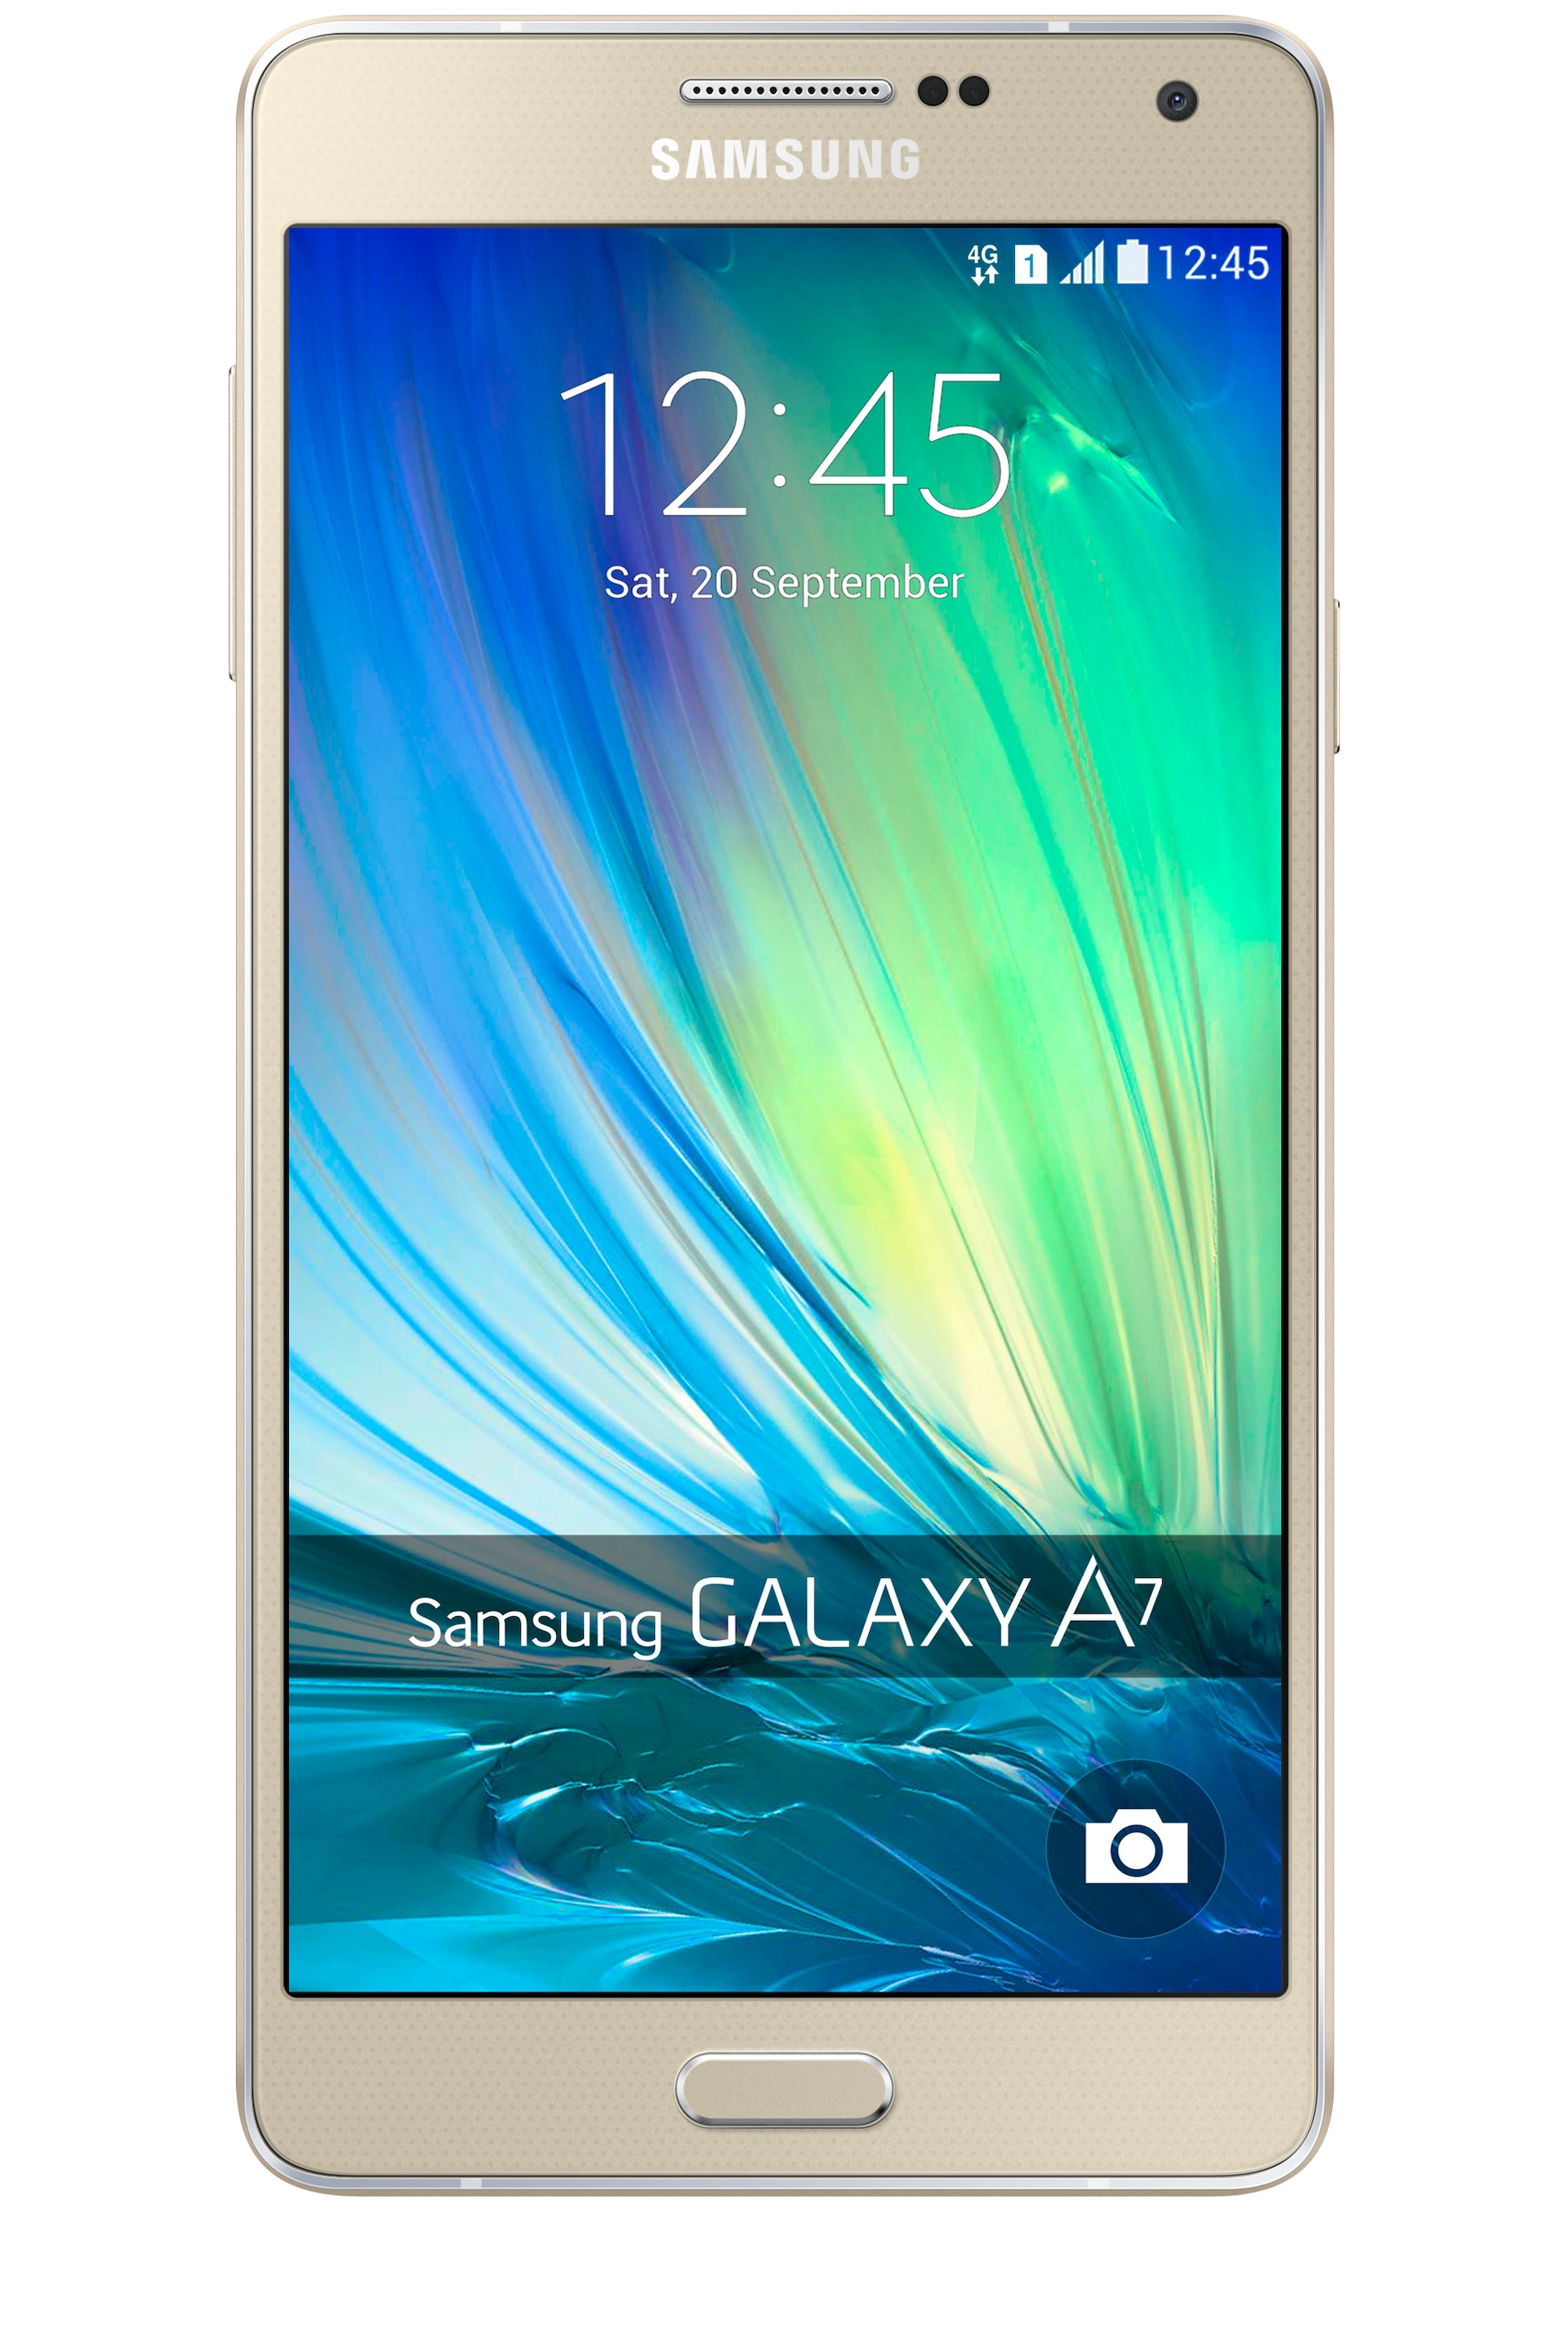 Samsung Galaxy A7 Unboxing and First Impressions